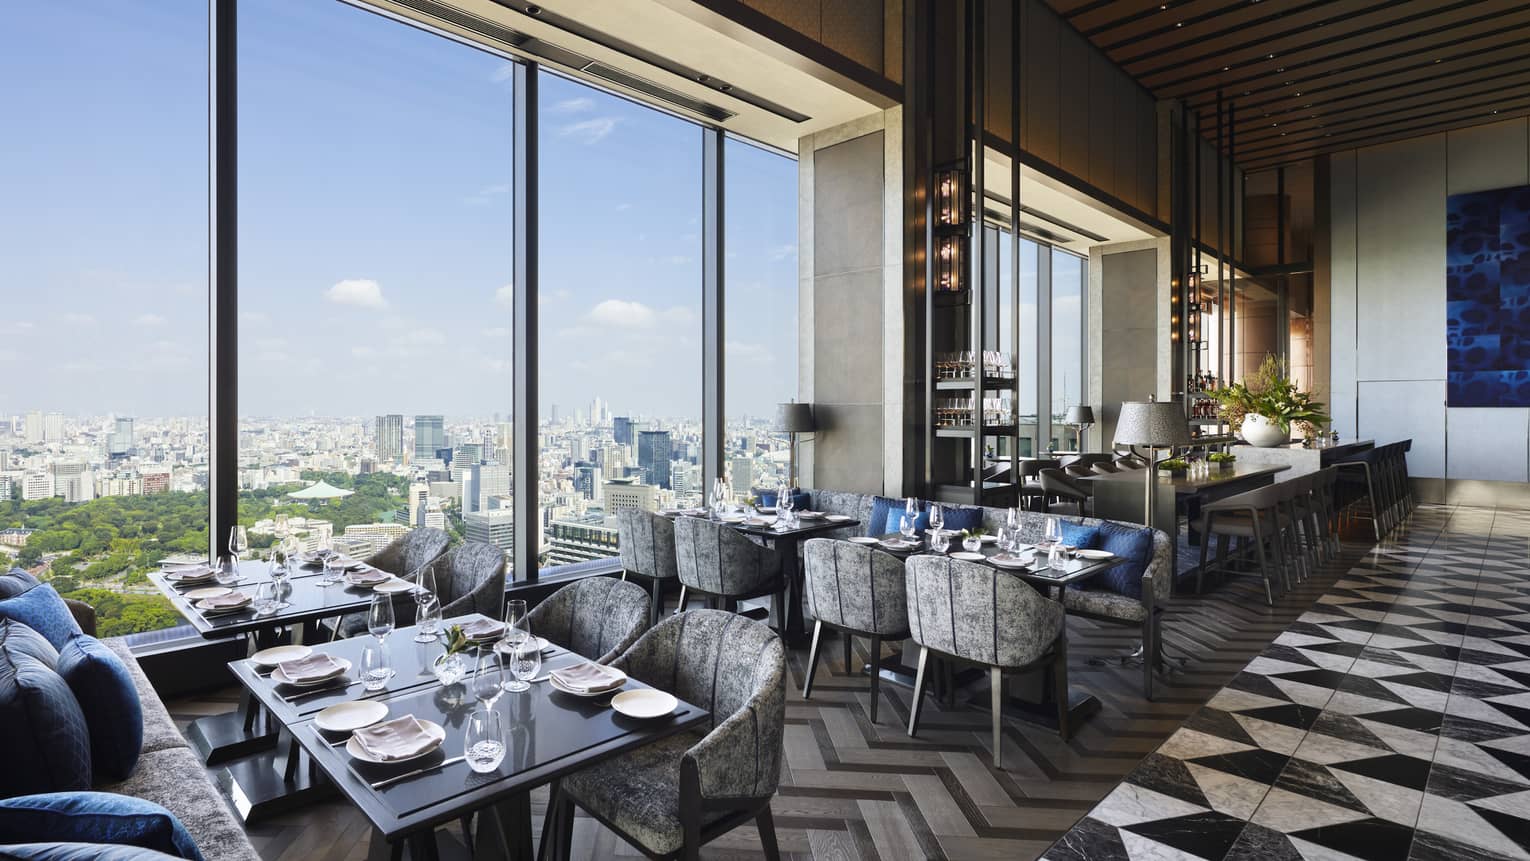 Four tables set for four with floor-to-ceiling windows, view of the city, natural light, grey and black colour scheme